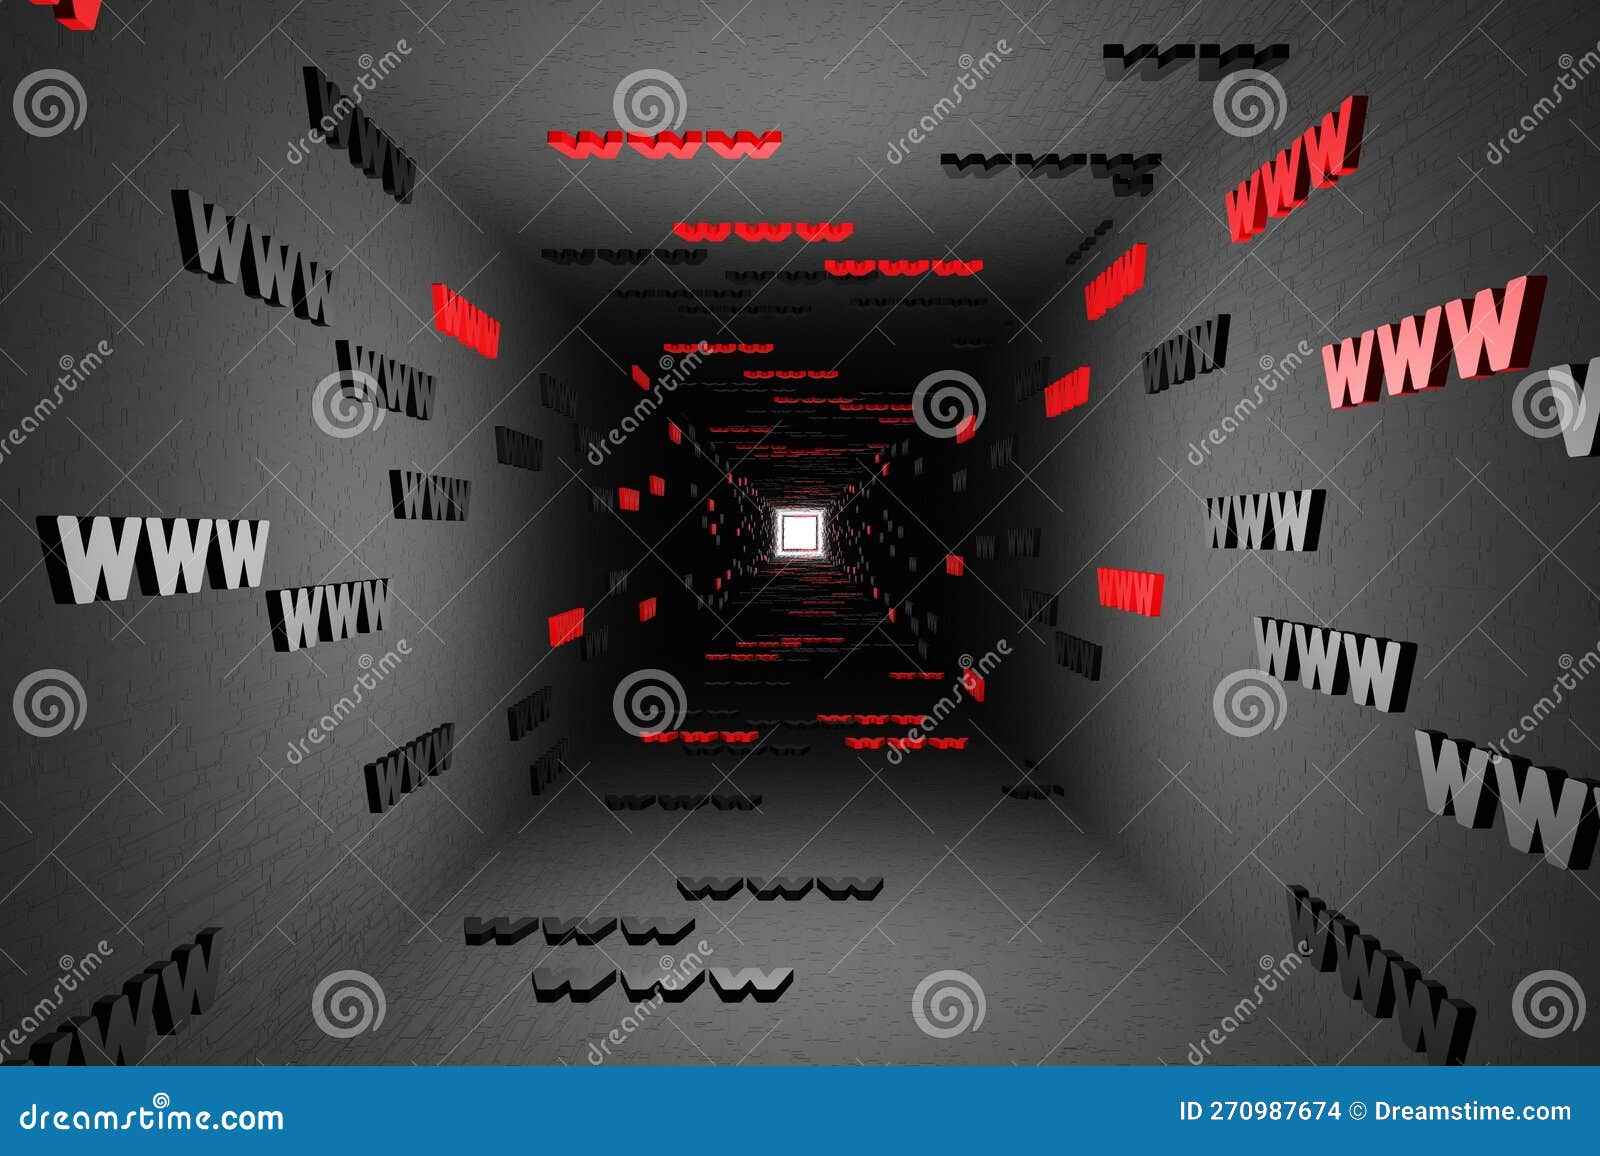 www s sign in black tunnel background 3d render. hypertext transfer protocol secure web 3